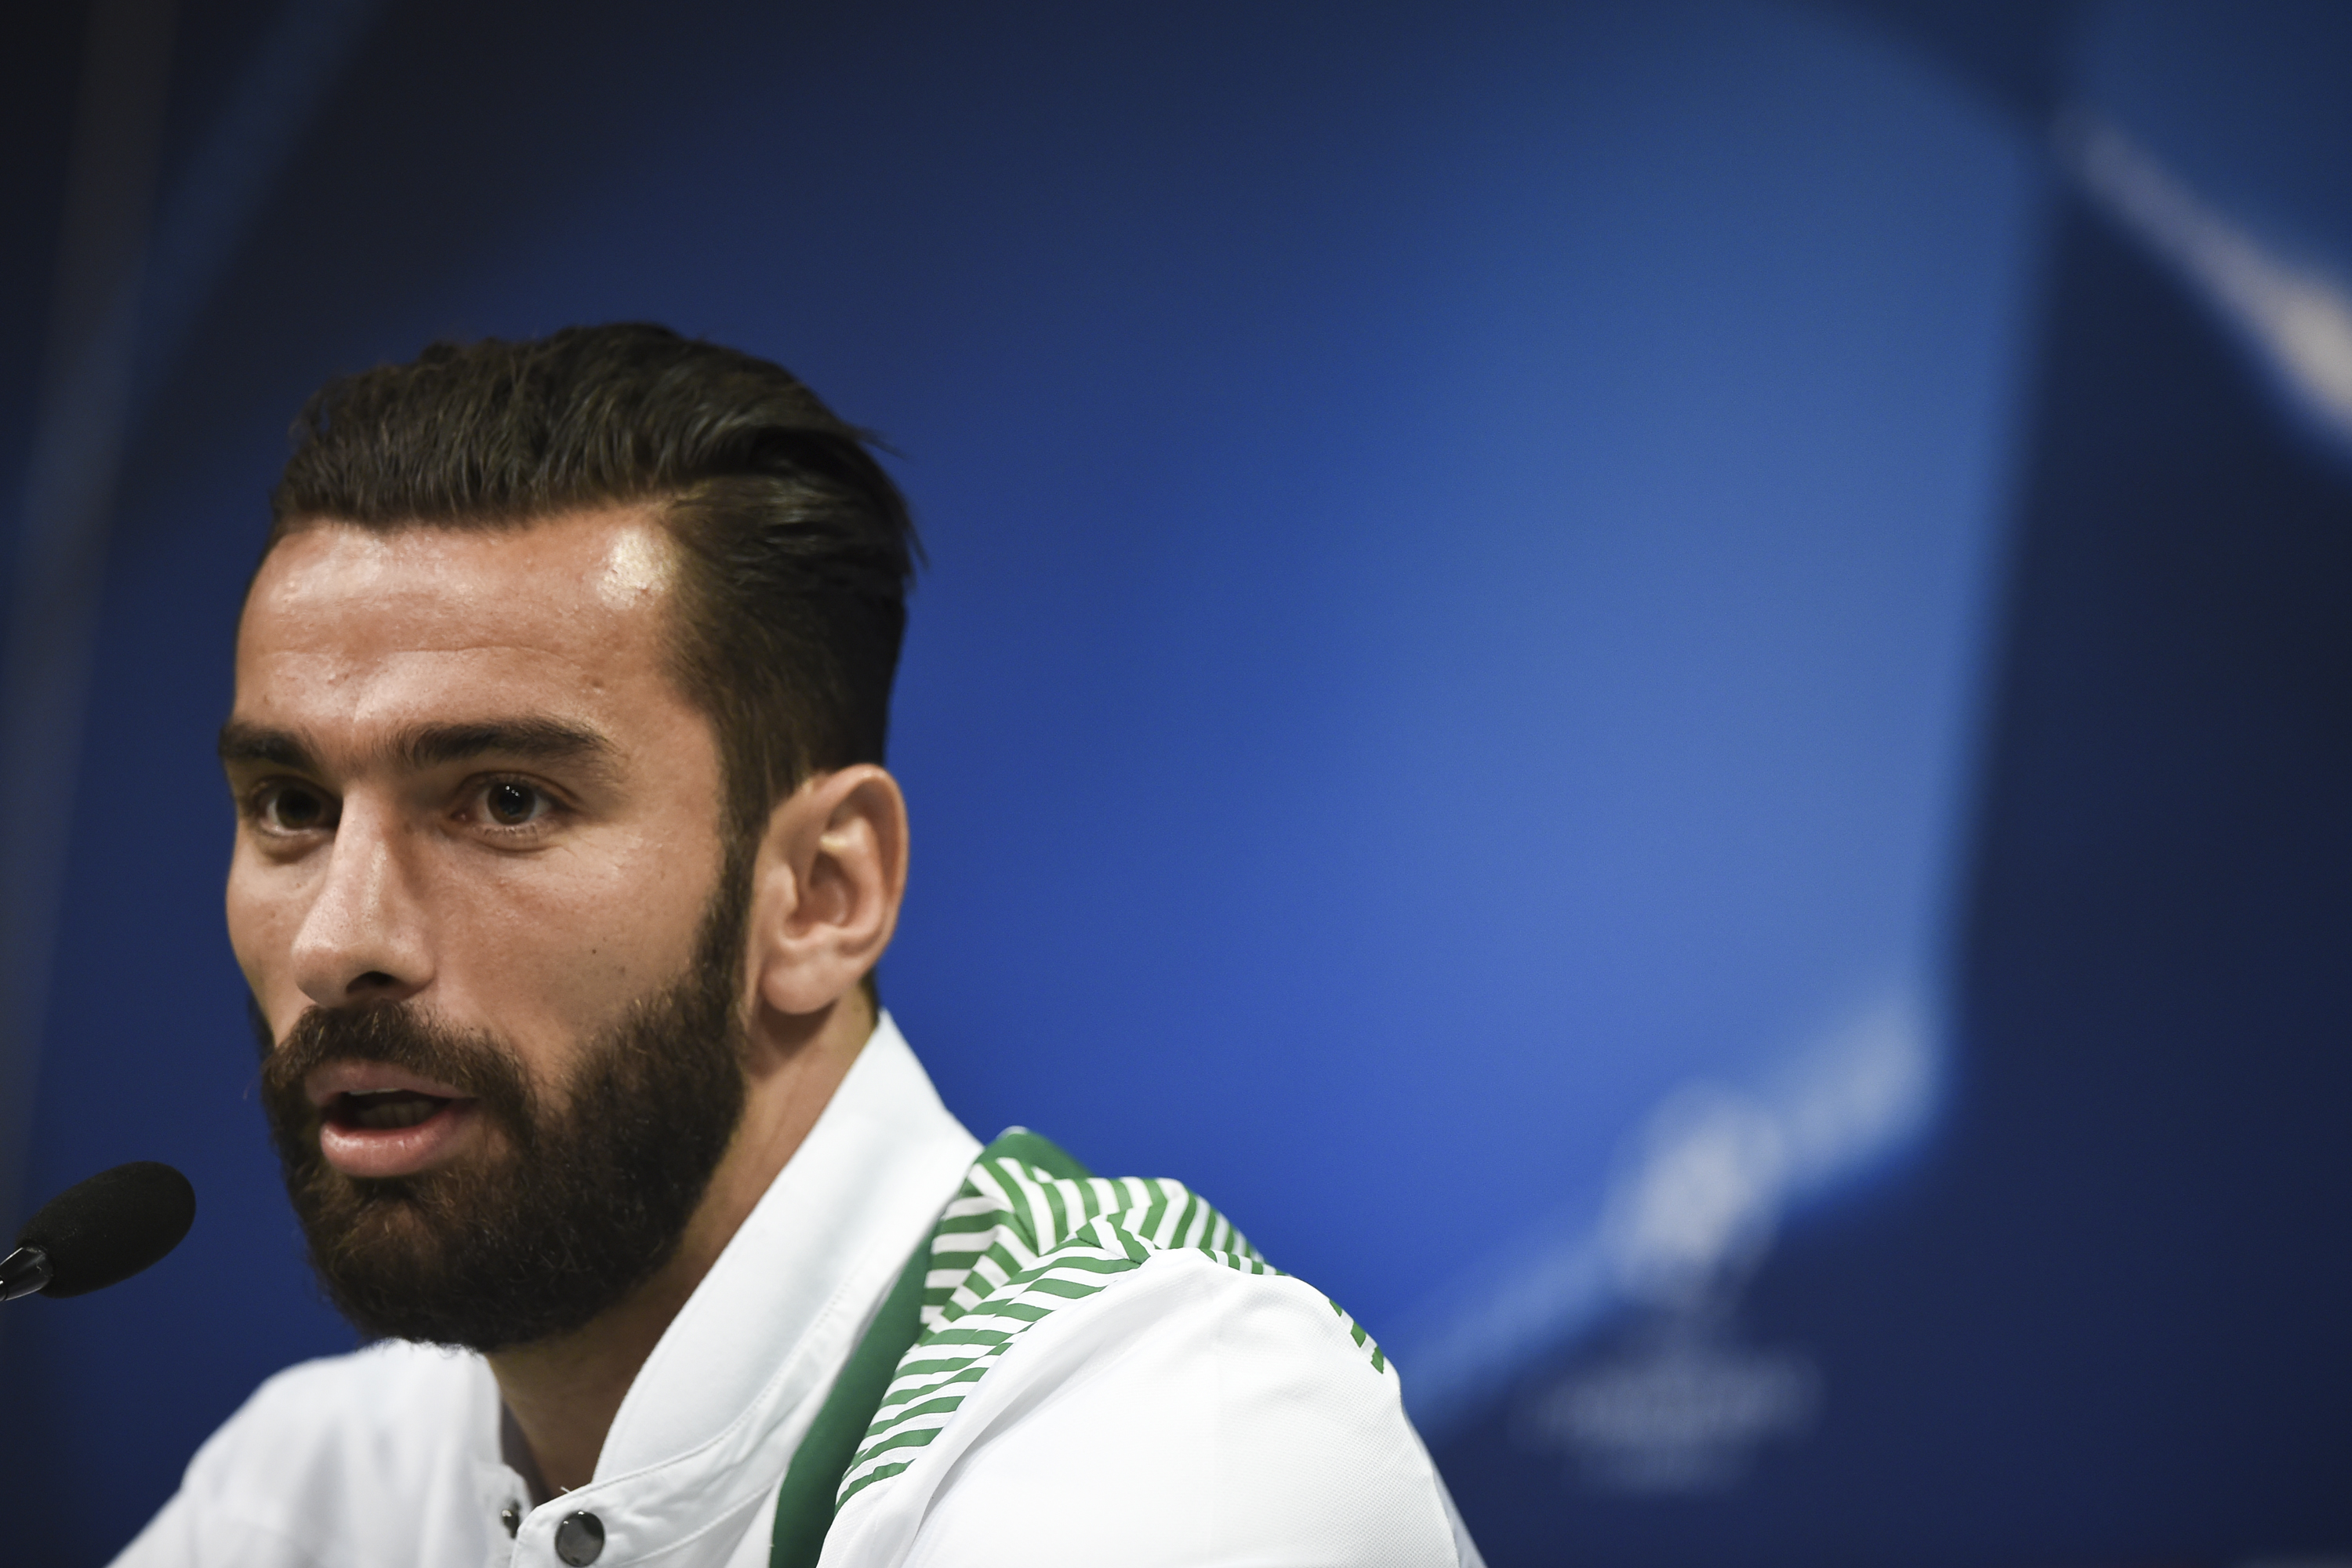 Sporting's goalkeeper Rui Patricio attends a press conference at Alvalade stadium in Lisbon on November 21, 2016, on the eve of the UEFA Champions League group F football match Sporting CP vs Real Madrid.  / AFP / PATRICIA DE MELO MOREIRA        (Photo credit should read PATRICIA DE MELO MOREIRA/AFP/Getty Images)